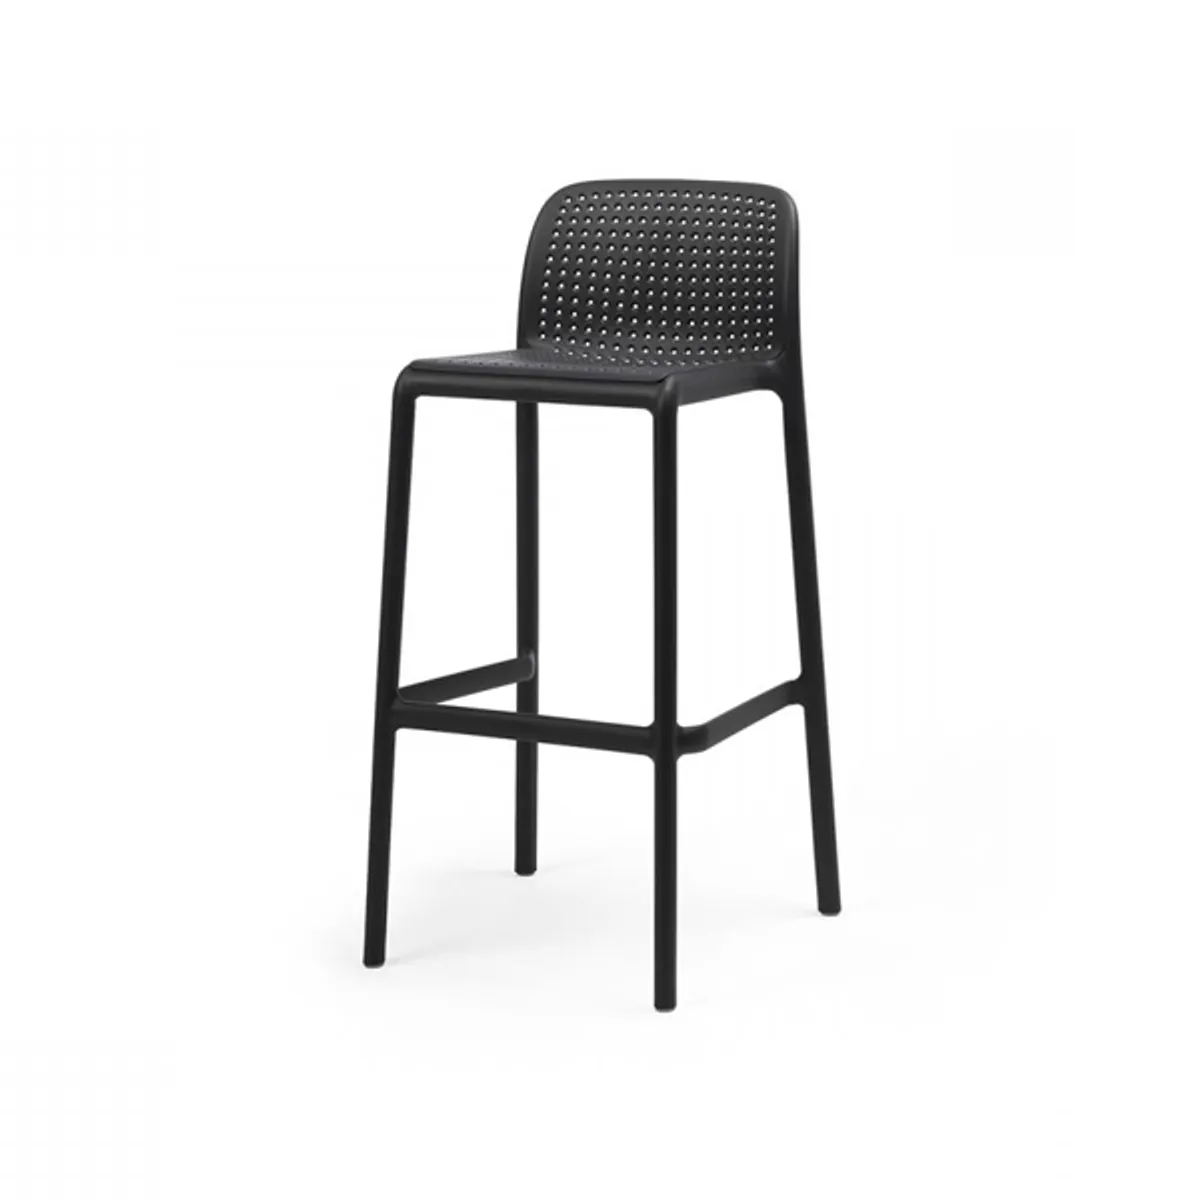 Lido bar stool Inside Out Contracts2